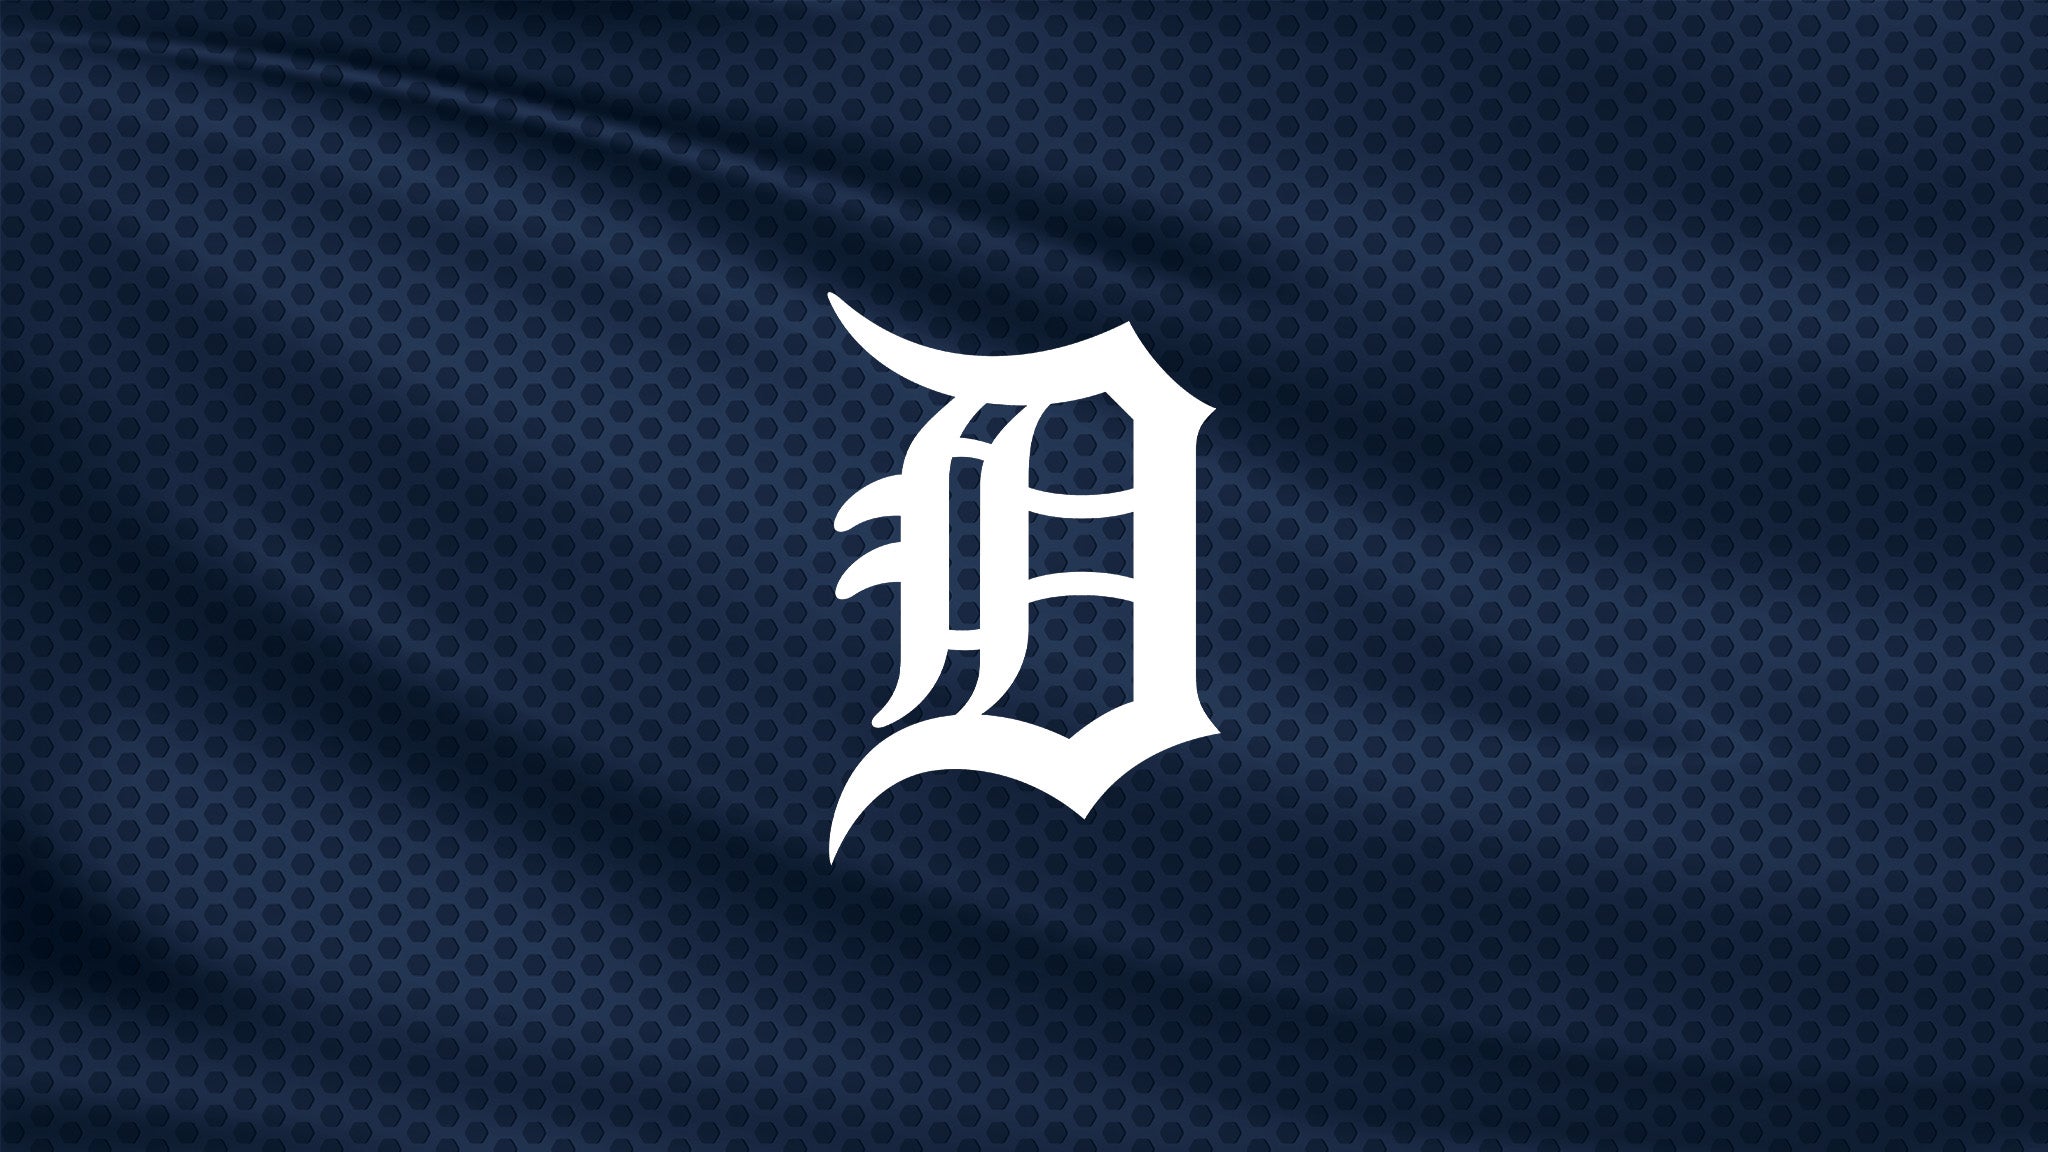 Detroit Tigers vs. Milwaukee Brewers at Comerica Park